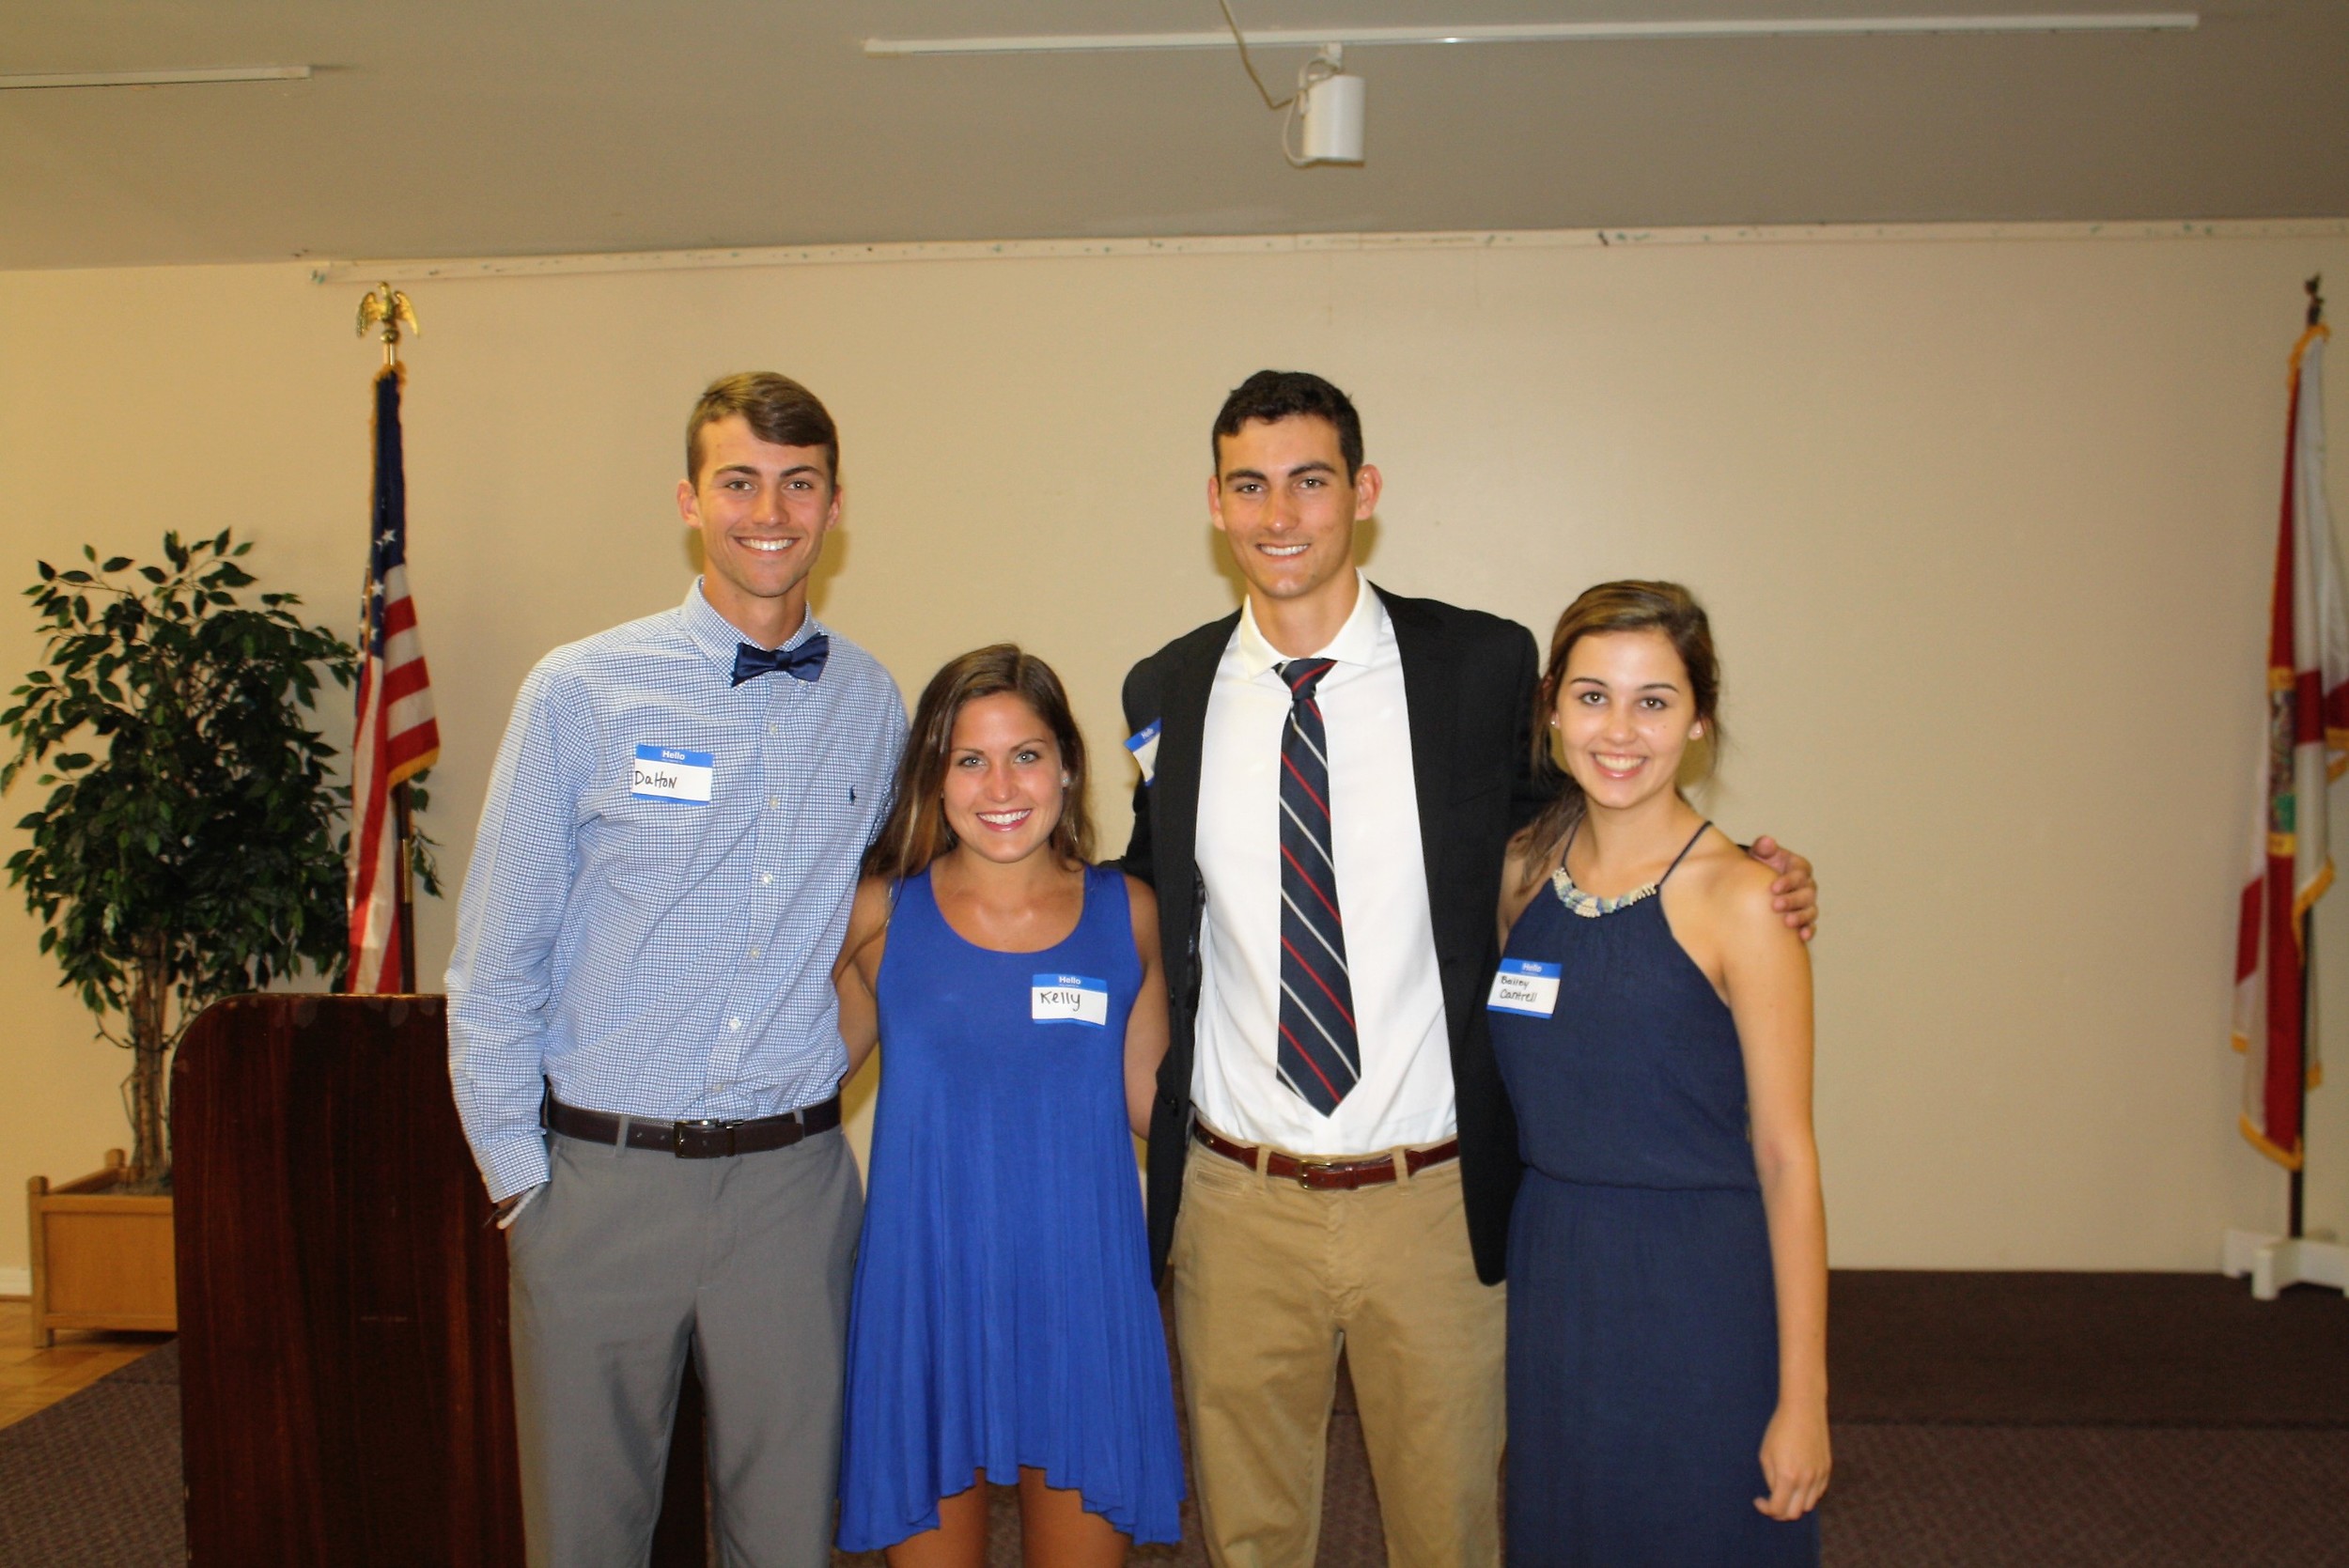 Winners of the 3rd Annual Republican Club of Greater St. Augustine Scholarship Essay Contest include (from left) Dalton Edgell (first place), Kelly Aponte (fourth place), Jackson Davies (second place) and Bailey Cantrell (third place).